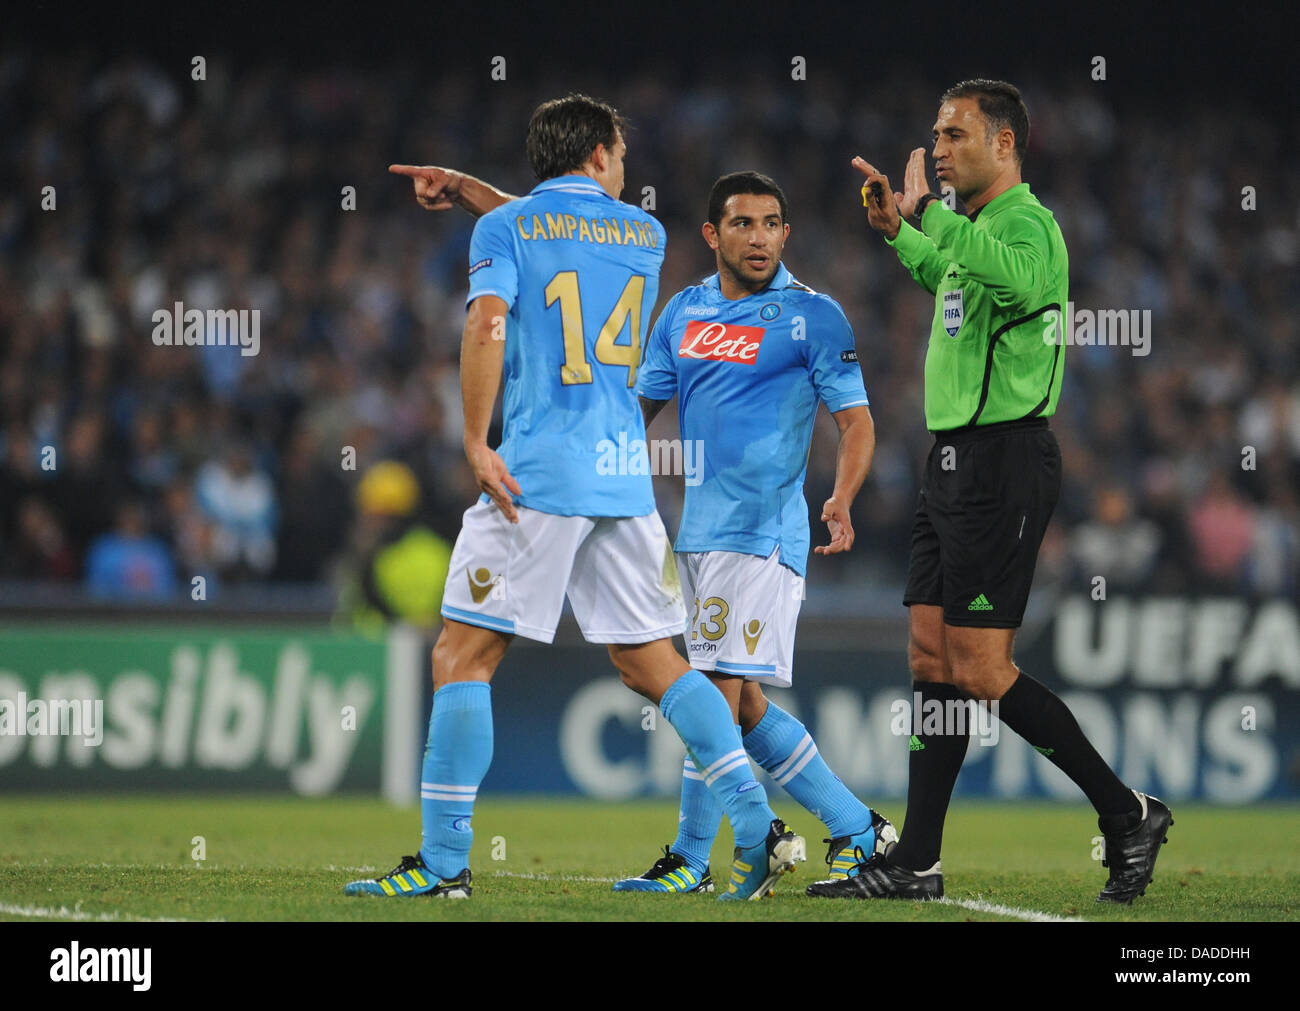 Christian Hugo Campagnaro (L) and Walter Gargano of Naples discuss with referee Olegario Benquerenca (R) during the Champions League group A soccer match between FC Bayern Munich and SSC Napoli at Stadio San Paolo in Naples, Italy, 18 October, 2011. The match ended 1-1. Photo: Andreas Gebert Stock Photo